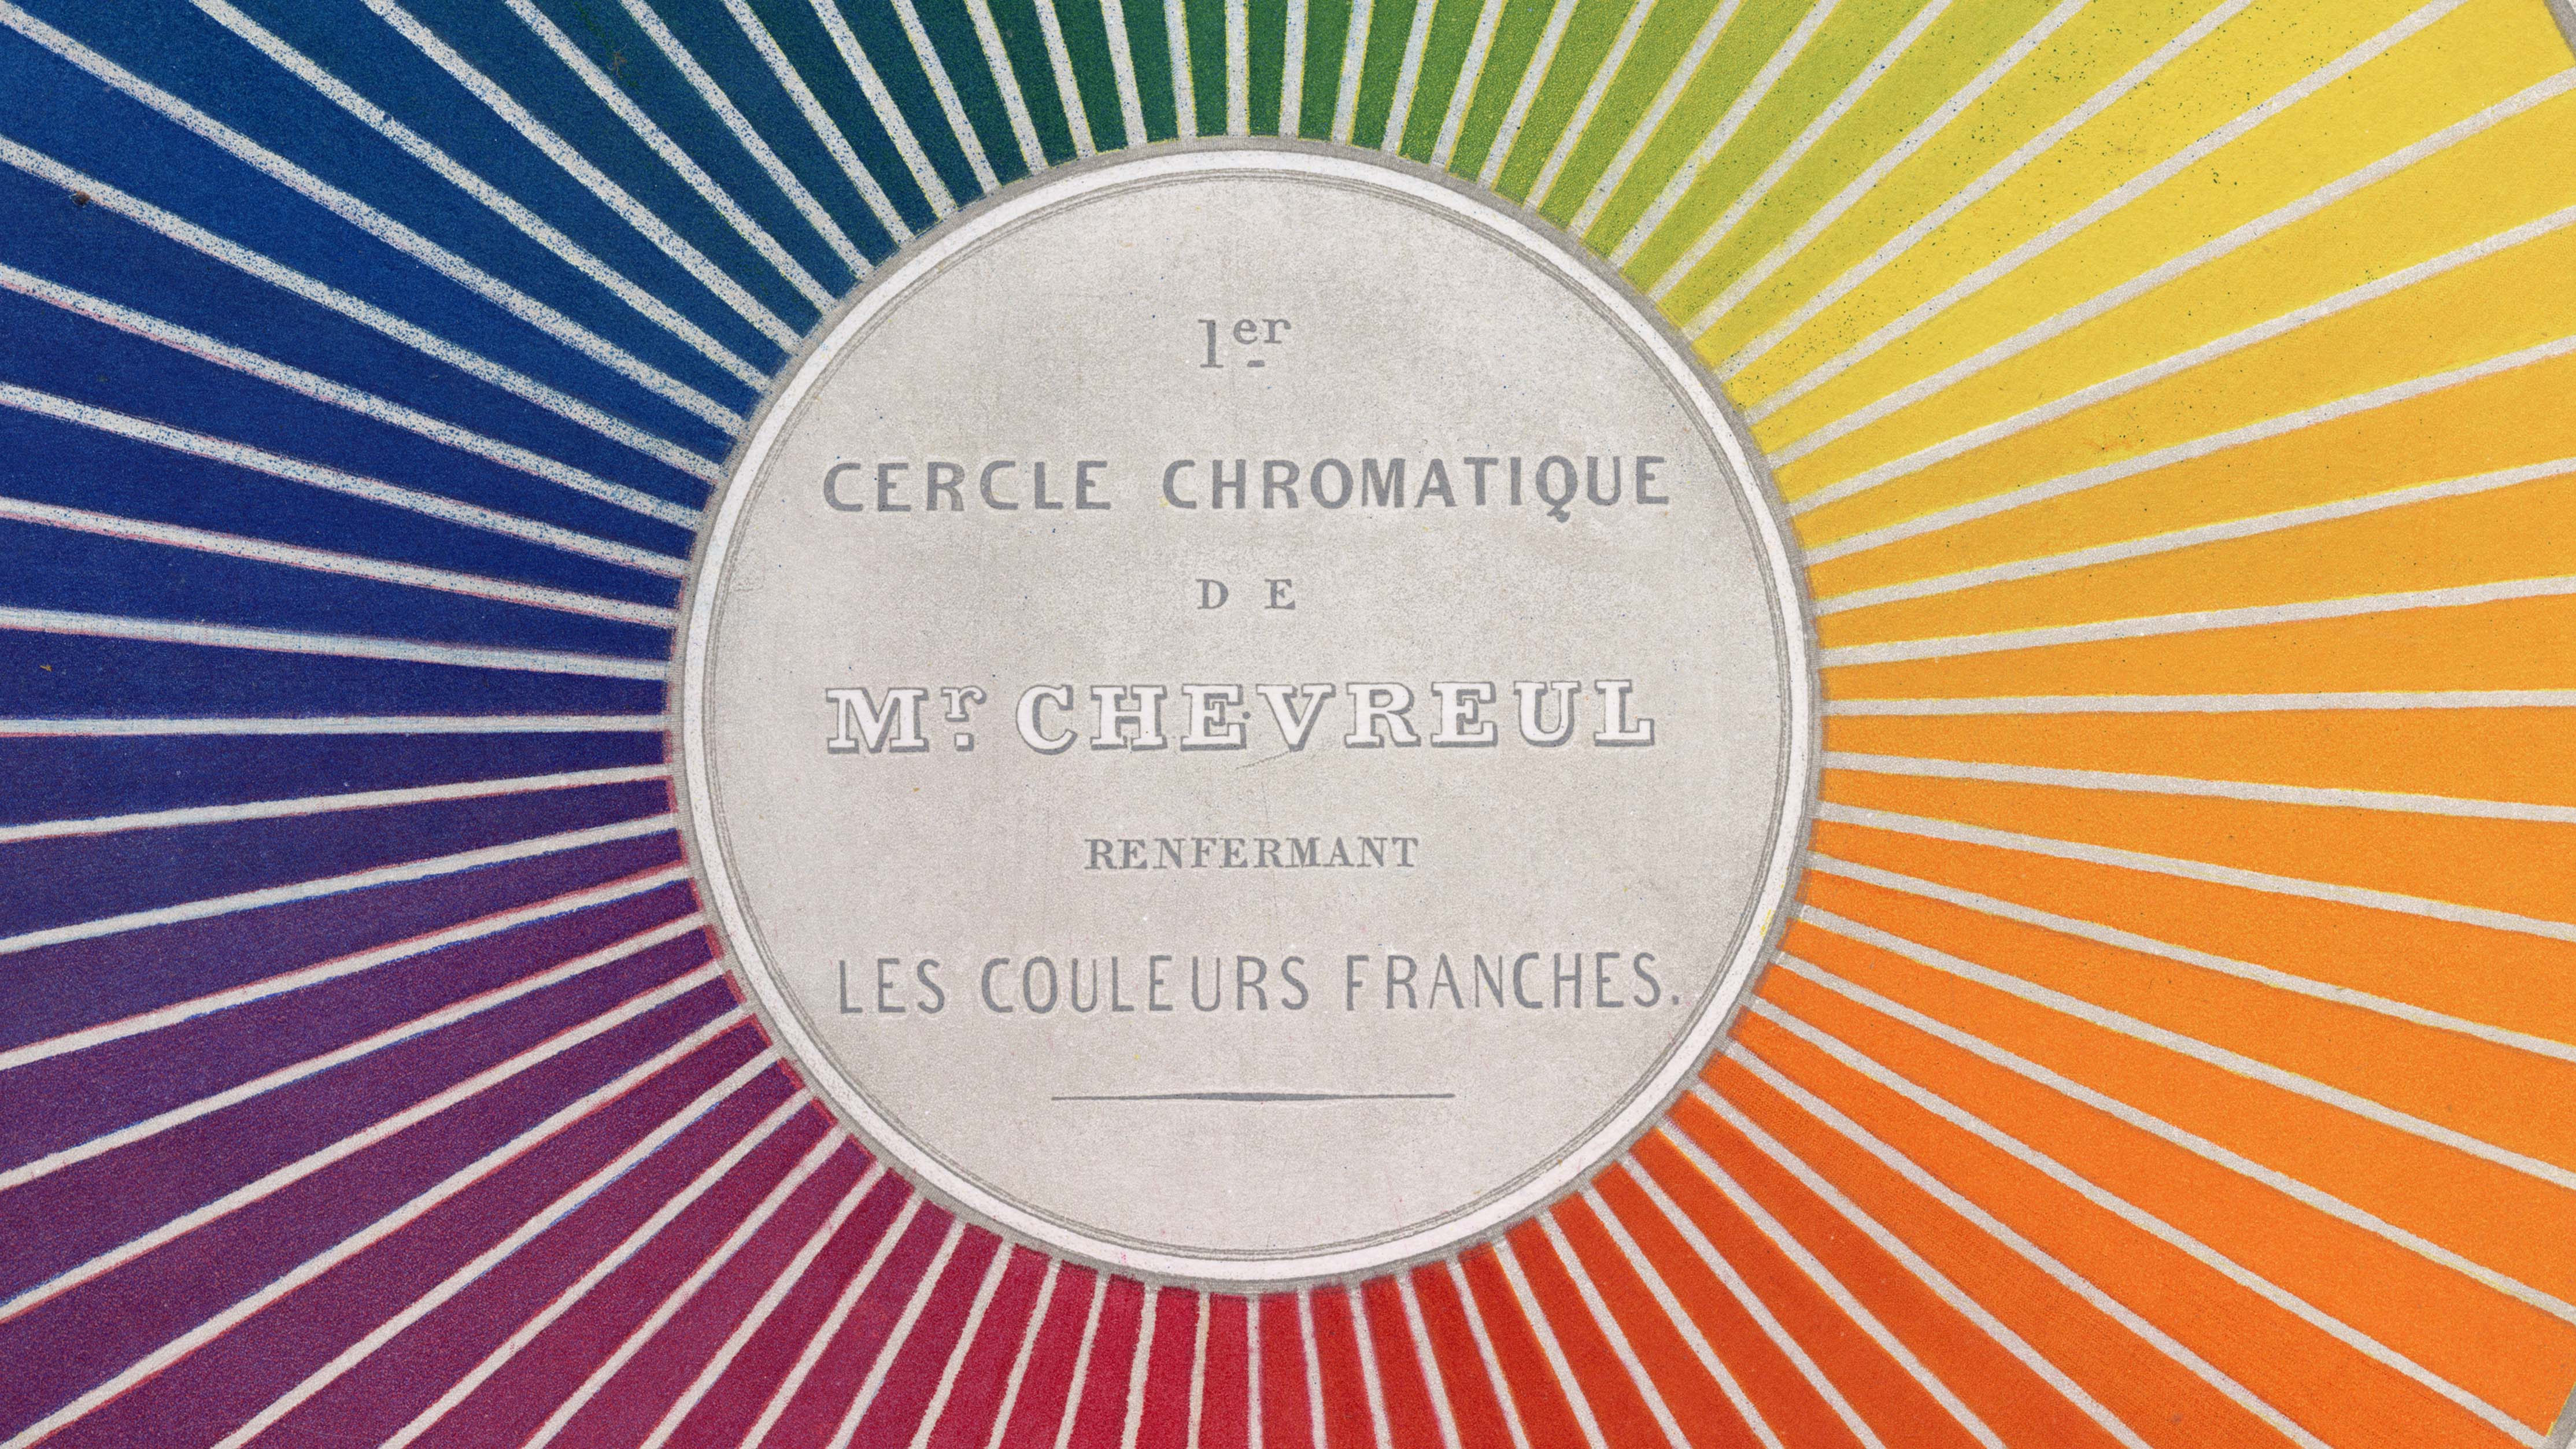 Graphic design showing a gray circle set in the middle of rectangle that has rainbow gradations of color. Words are lightly printed on the gray circle  reading 1er cercle chromatic de M. Chevreulr les couleurs franches."Diagonal white lines radiate out from the perimeter of the circle across the colored field.